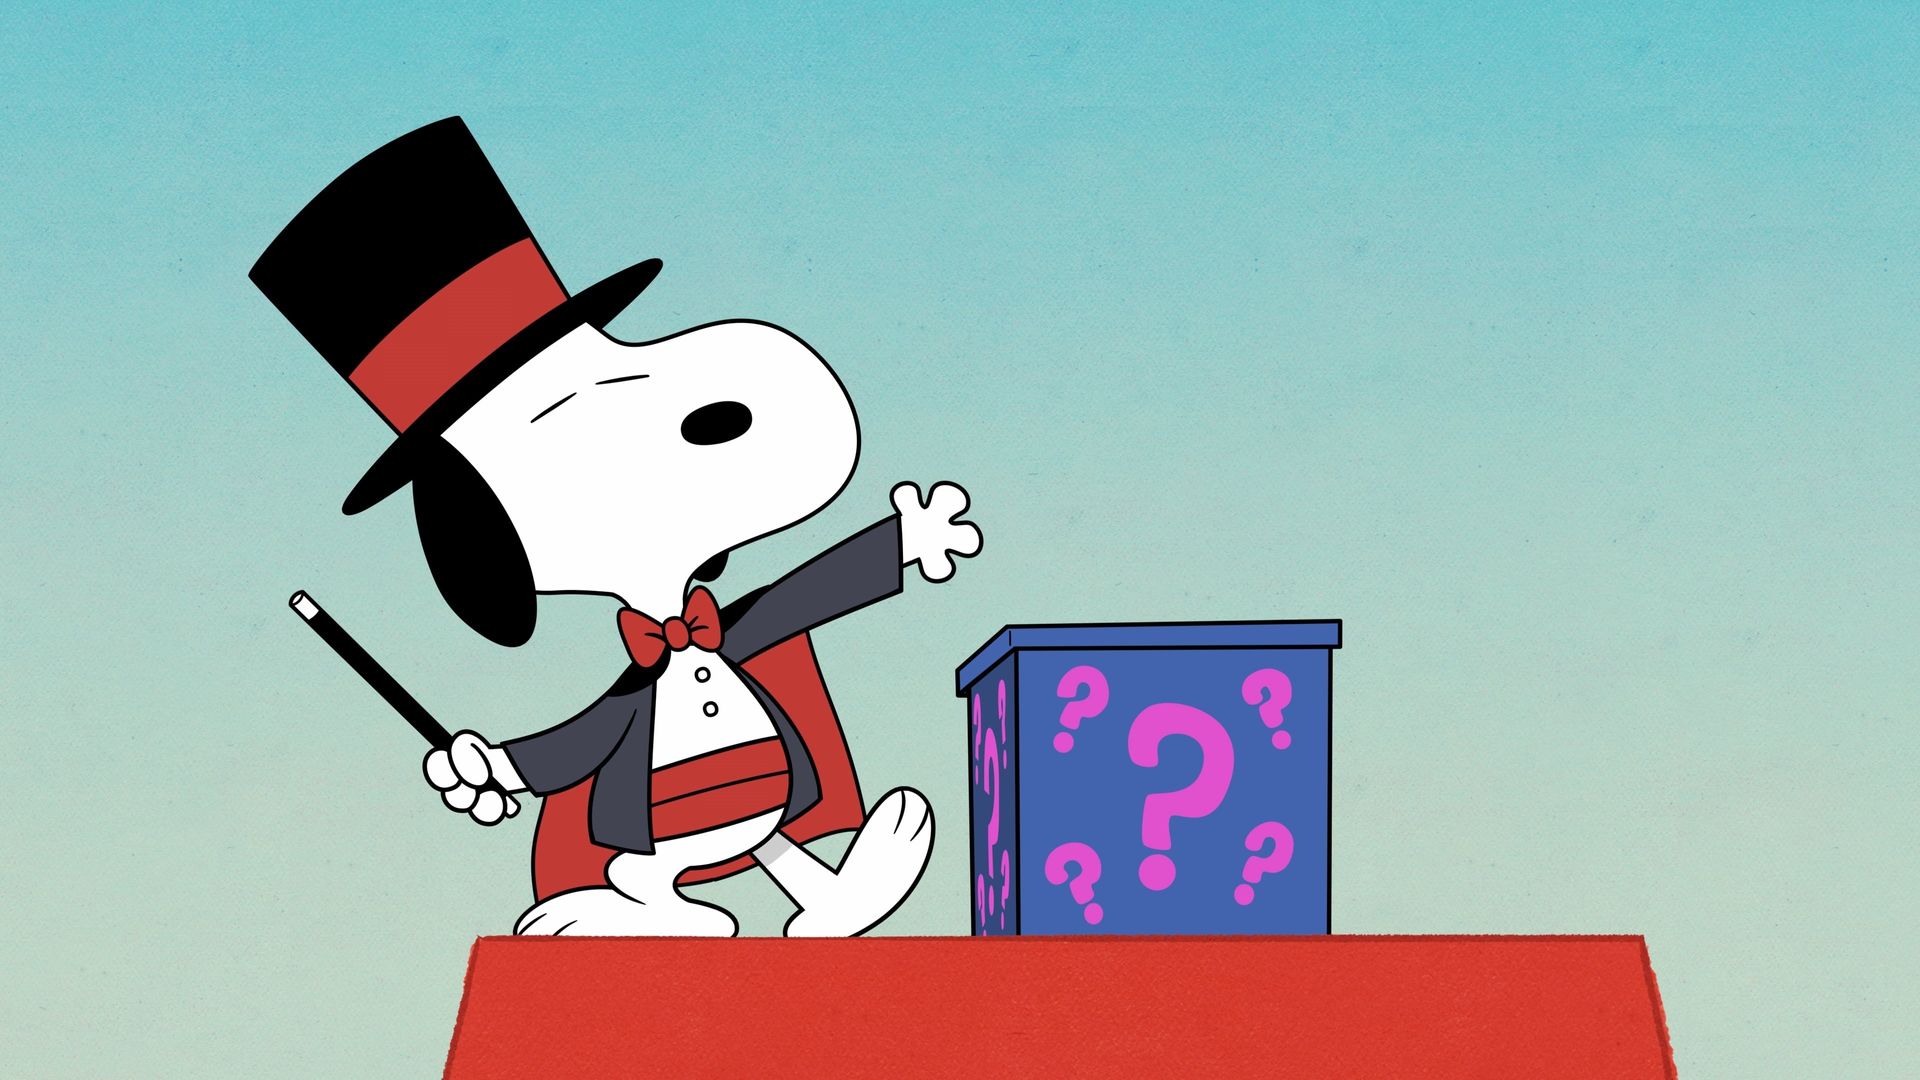 The Snoopy Show background